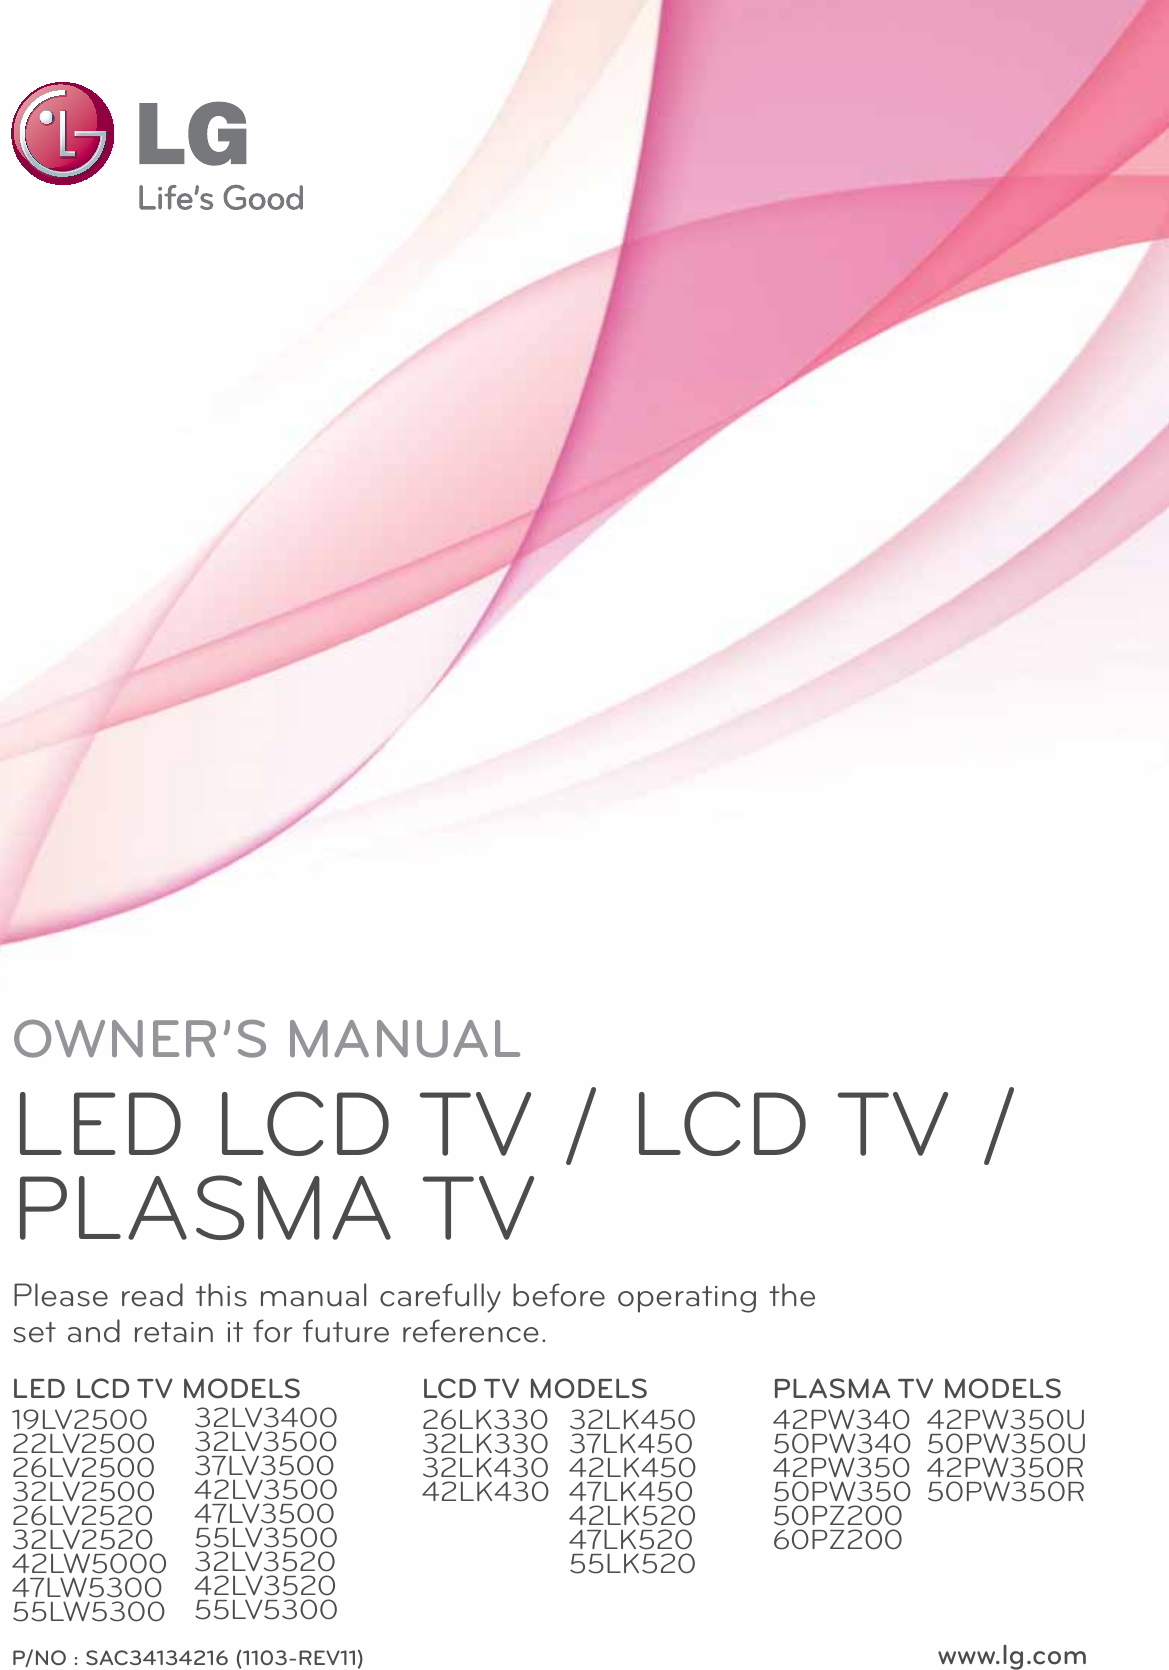 www.lg.comP/NO : SAC34134216 (1103-REV11)OWNER’S MANUALLED LCD TV / LCD TV / PLASMA TVPlease read this manual carefully before operating the set and retain it for future reference.LED LCD TV MODELS19LV250022LV250026LV250032LV250026LV252032LV252042LW500047LW530055LW5300LCD TV MODELS26LK33032LK33032LK43042LK430PLASMA TV MODELS42PW34050PW34042PW35050PW35050PZ20060PZ20032LV340032LV350037LV350042LV350047LV350055LV350032LV352042LV352055LV530032LK45037LK45042LK45047LK45042LK52047LK52055LK52042PW350U50PW350U42PW350R50PW350R